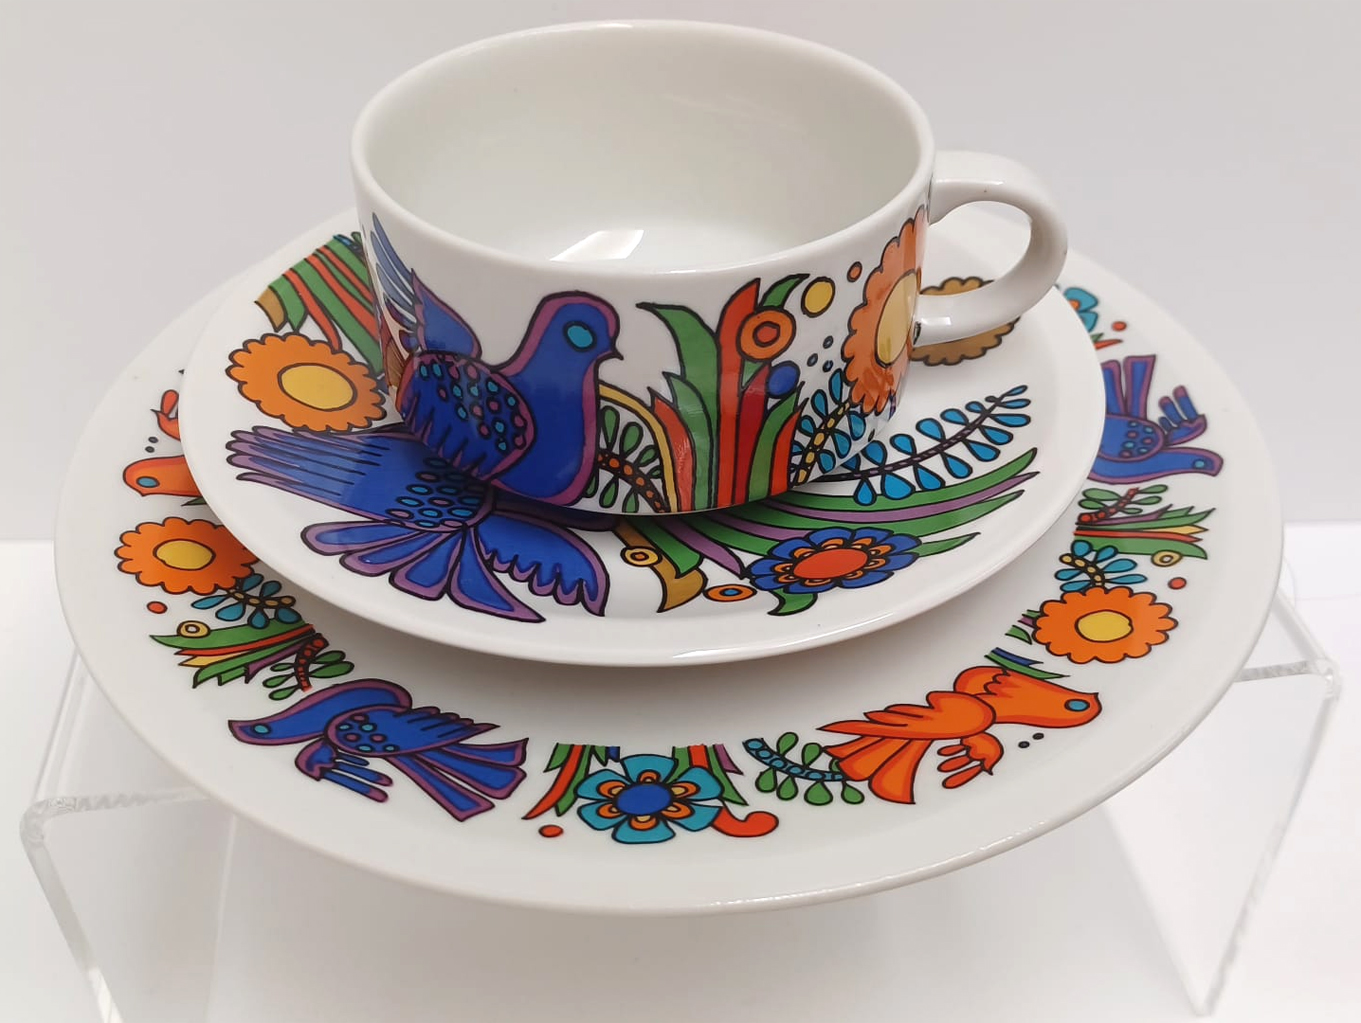 VILLEROY AND BOCH "ACAPULCO" BREAKFAST SET INC. COFFEE POT, 6 PLATES 8", 6 CUPS, 7 SAUCERS, ETC. - Image 5 of 7